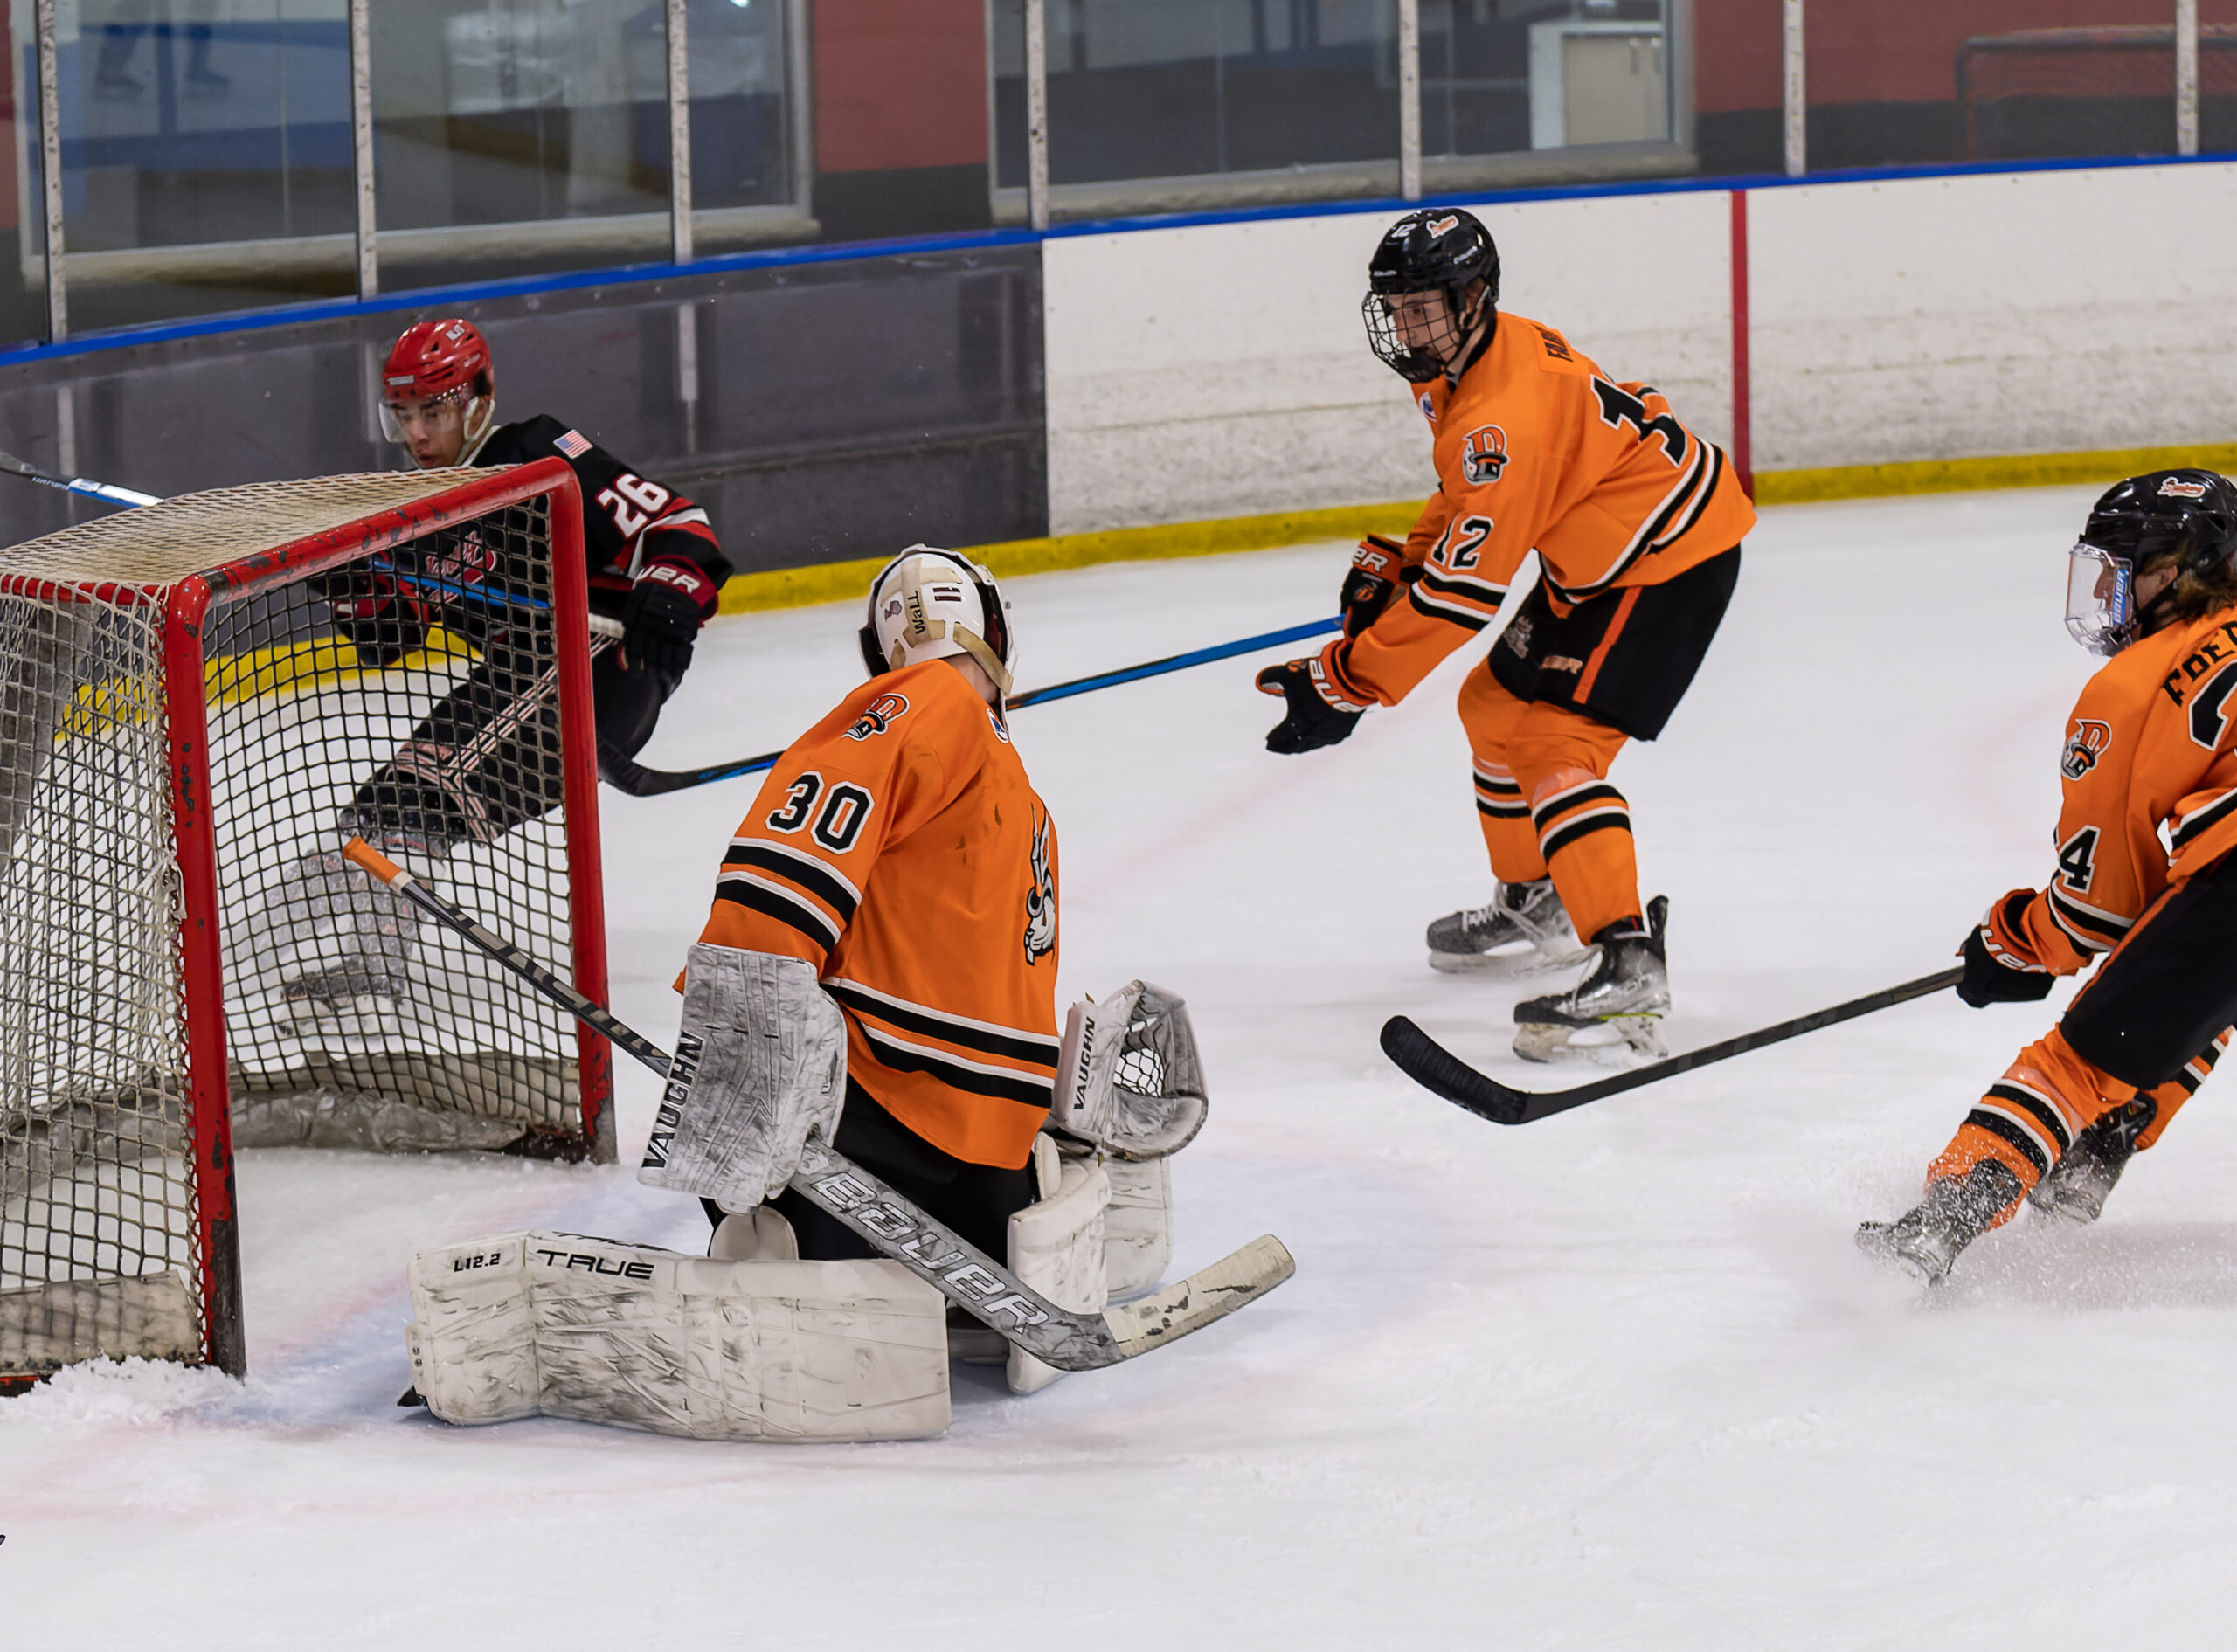 Balance attack leads Titans to 6 – 2 win over Danbury to clinch playoff birth